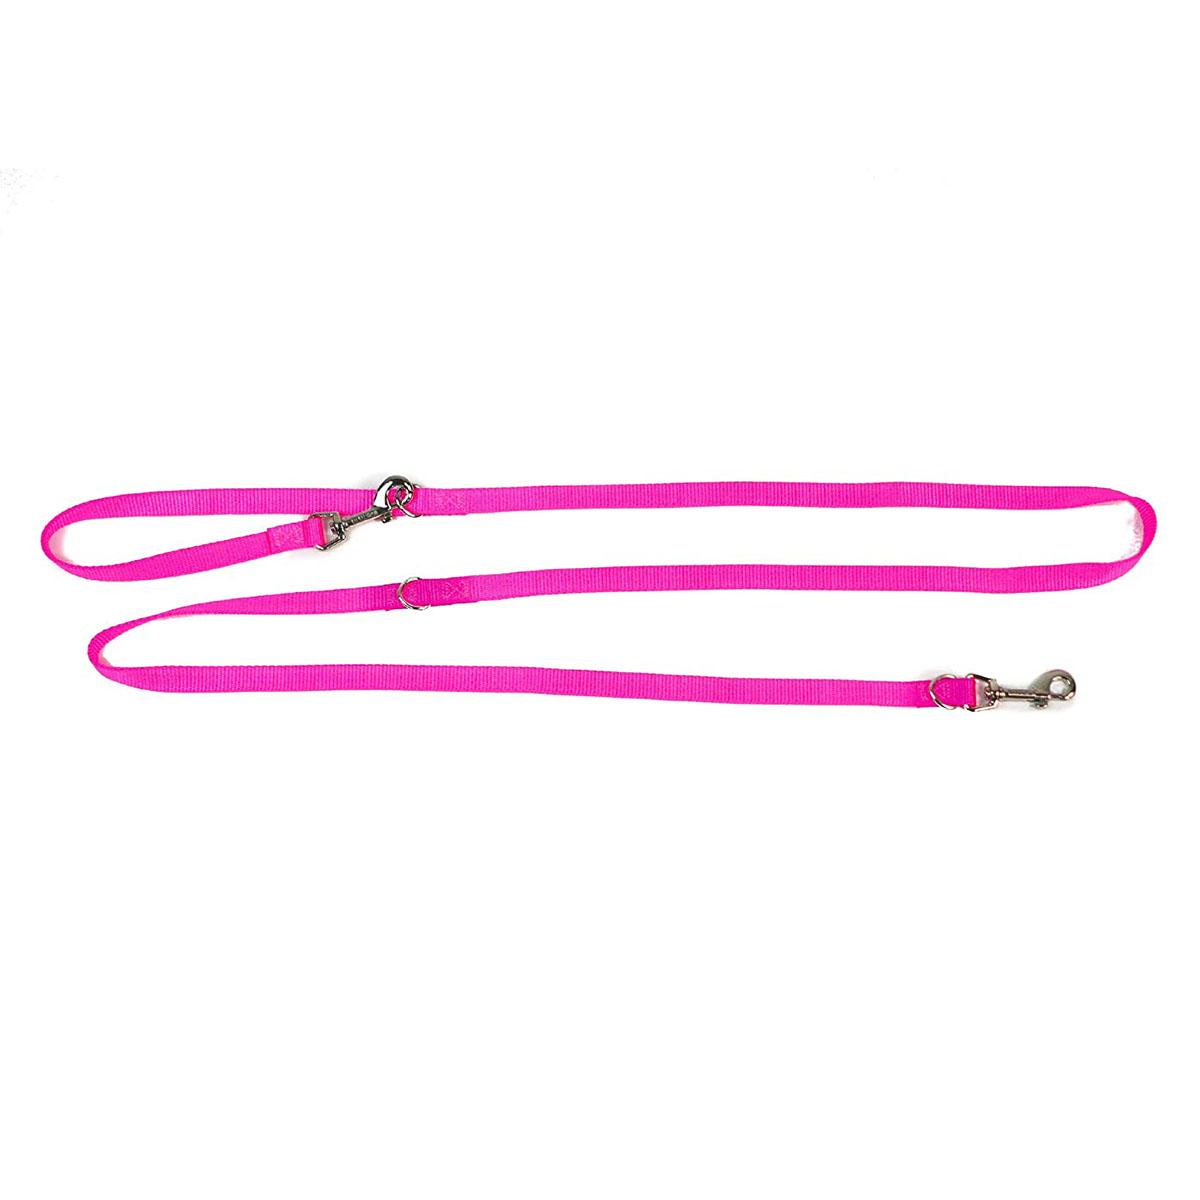 Blue-9 Multi-Function Leash - Hot Pink